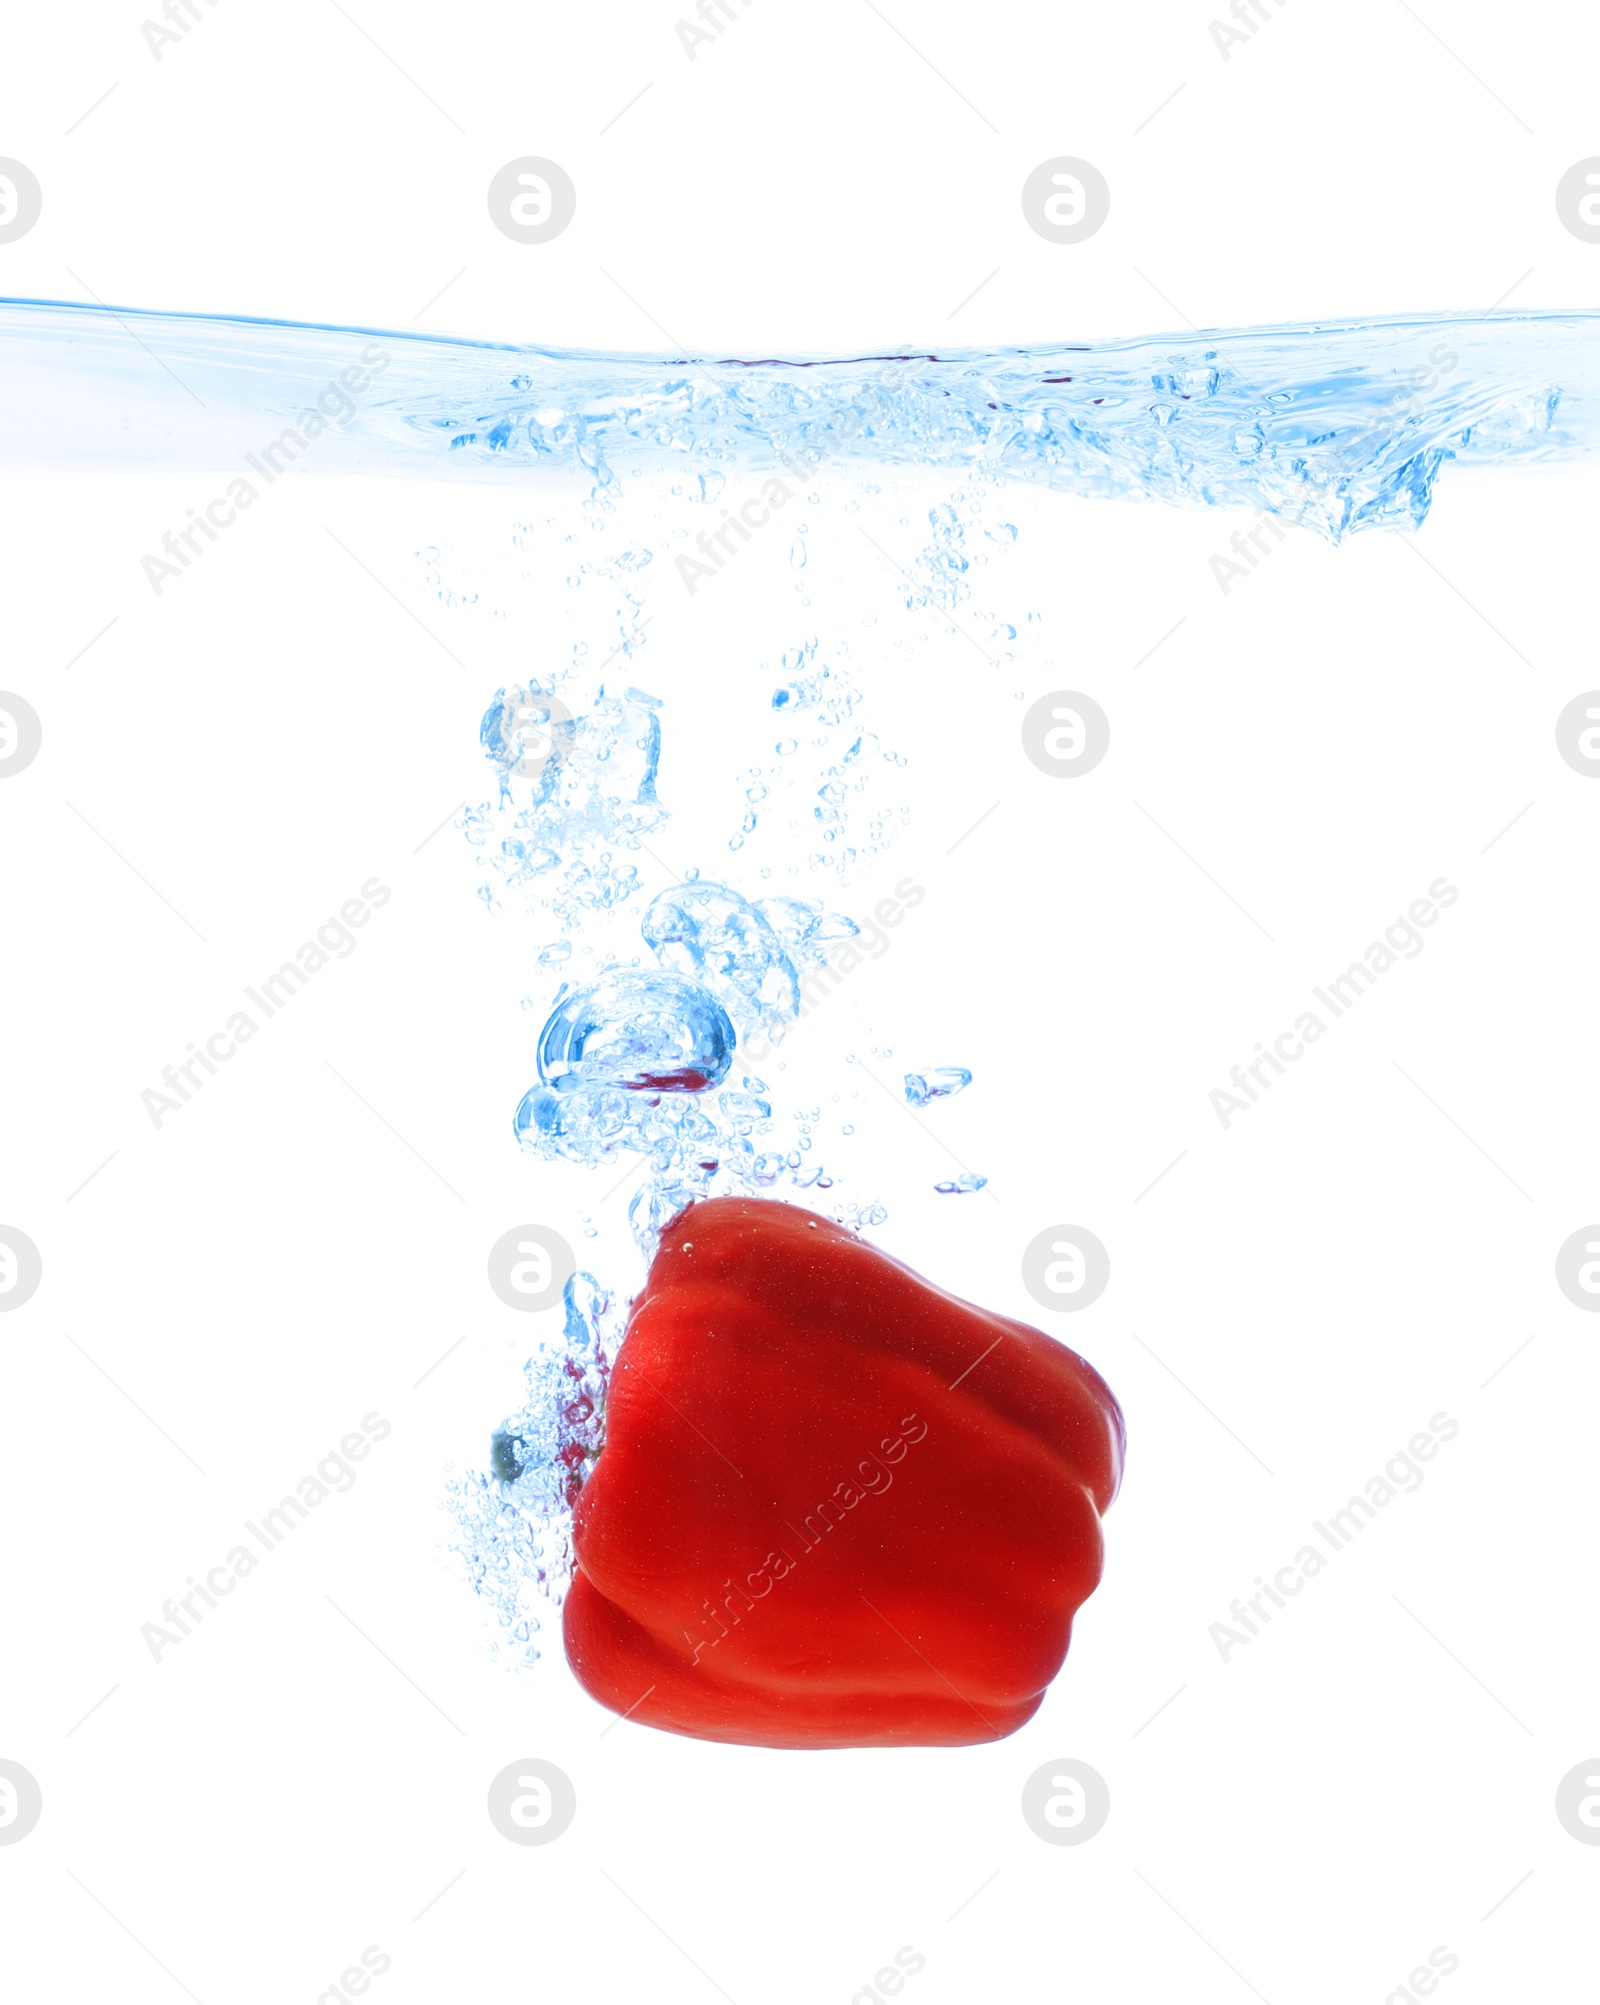 Photo of Red bell pepper falling down into clear water against white background